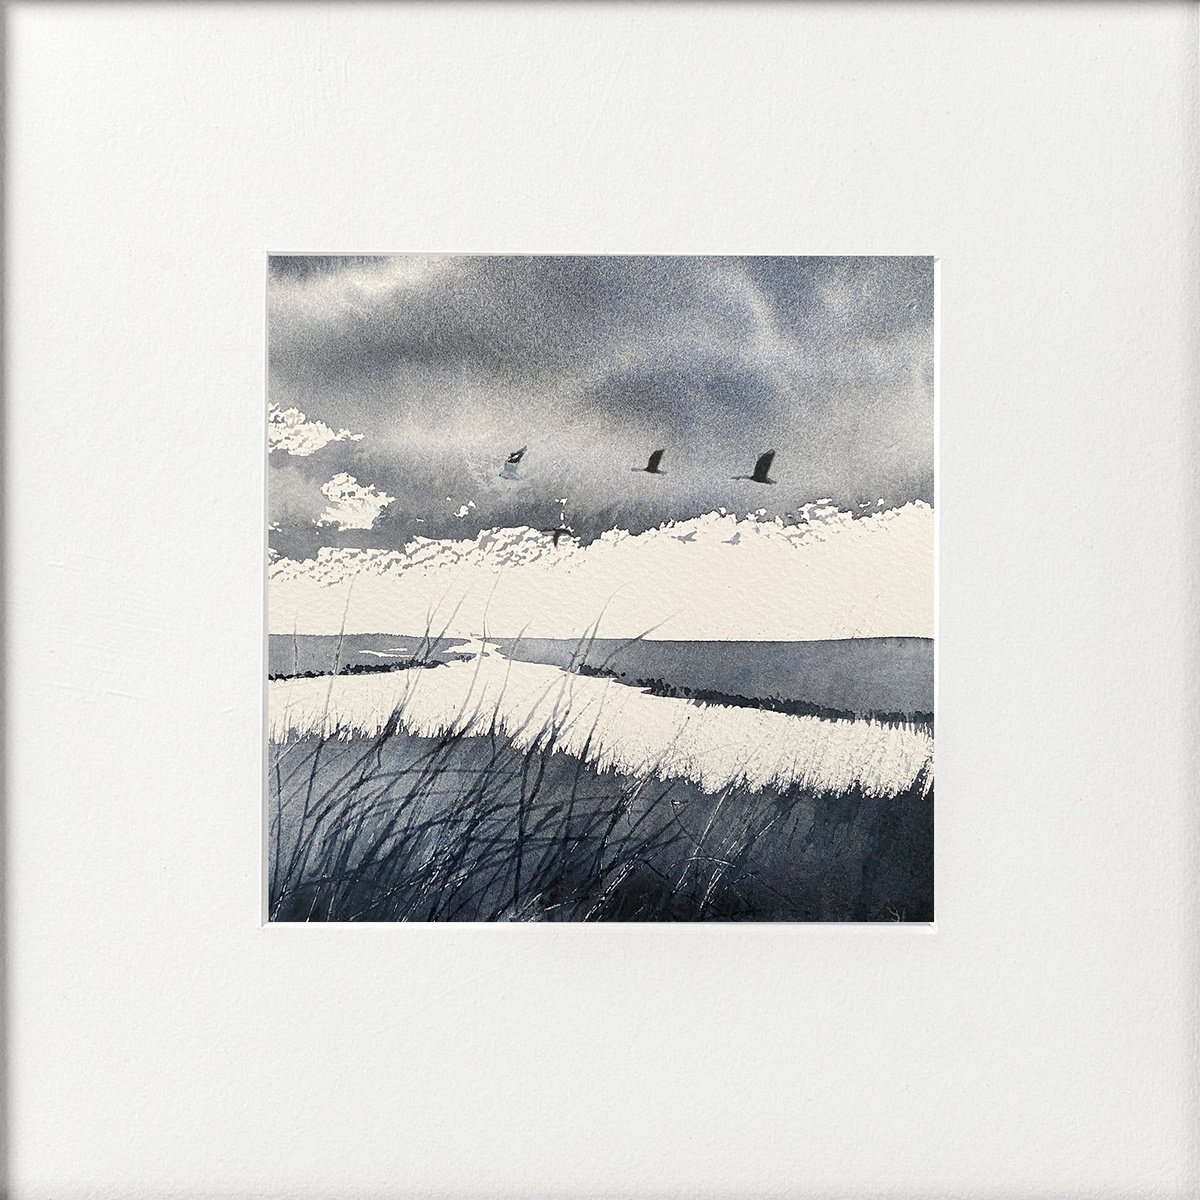 Monochrome - Three Geese passing over marshes by Teresa Tanner